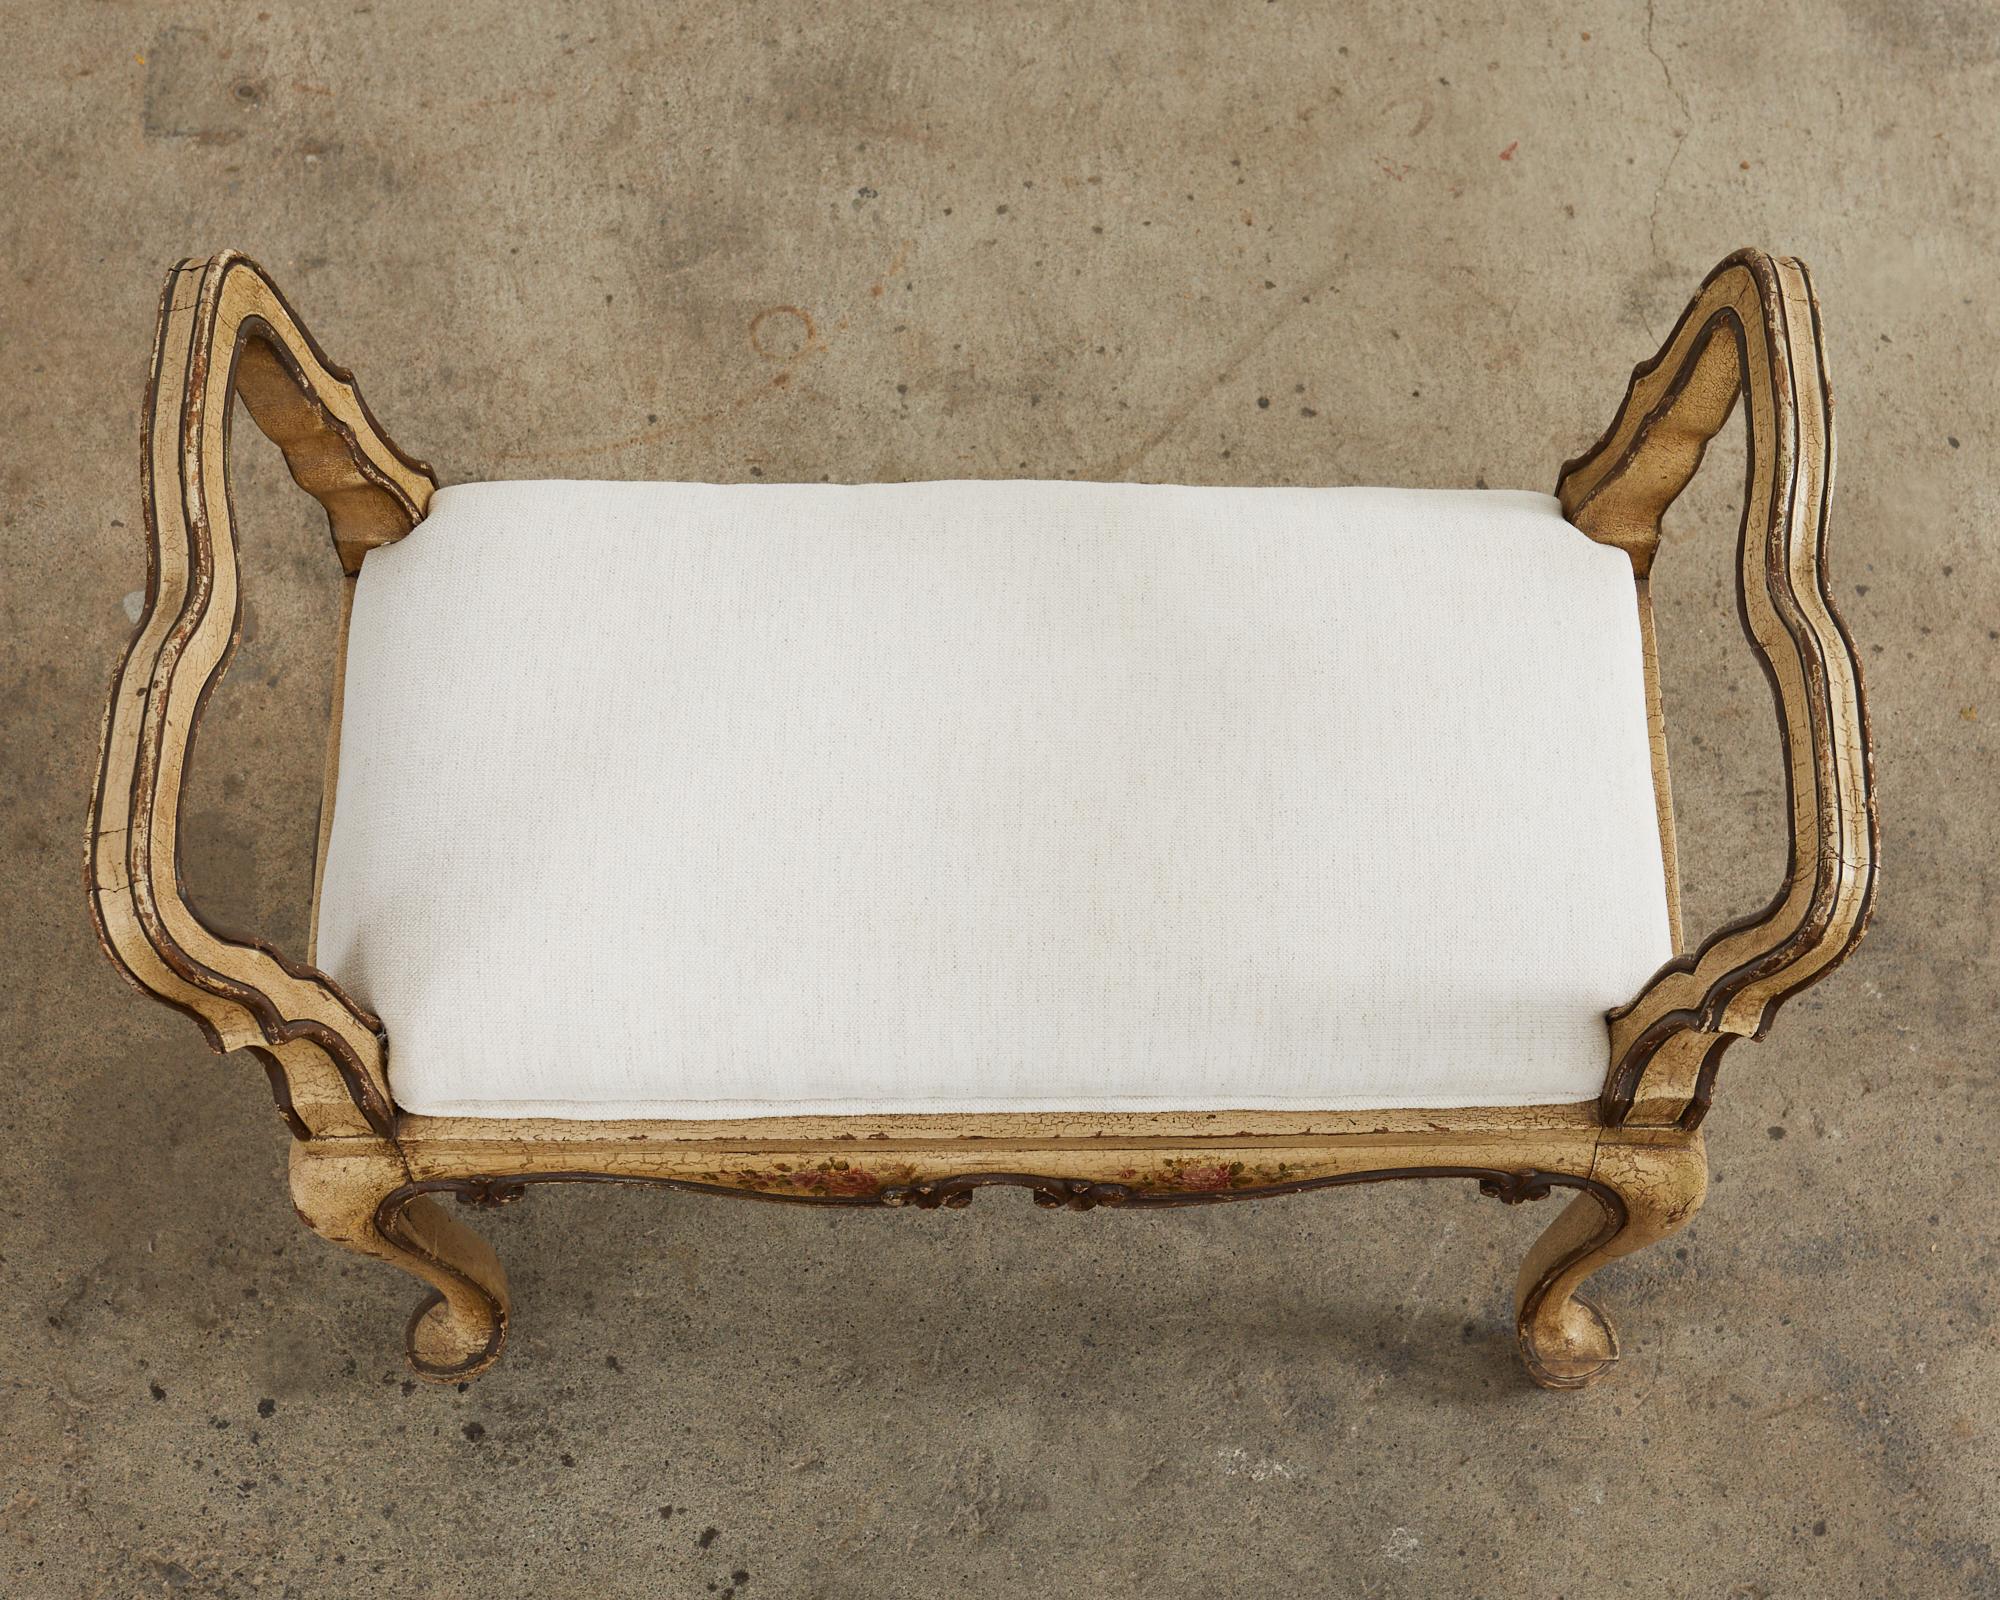 19th Country French Provincial Painted Bench or Footstool In Distressed Condition For Sale In Rio Vista, CA